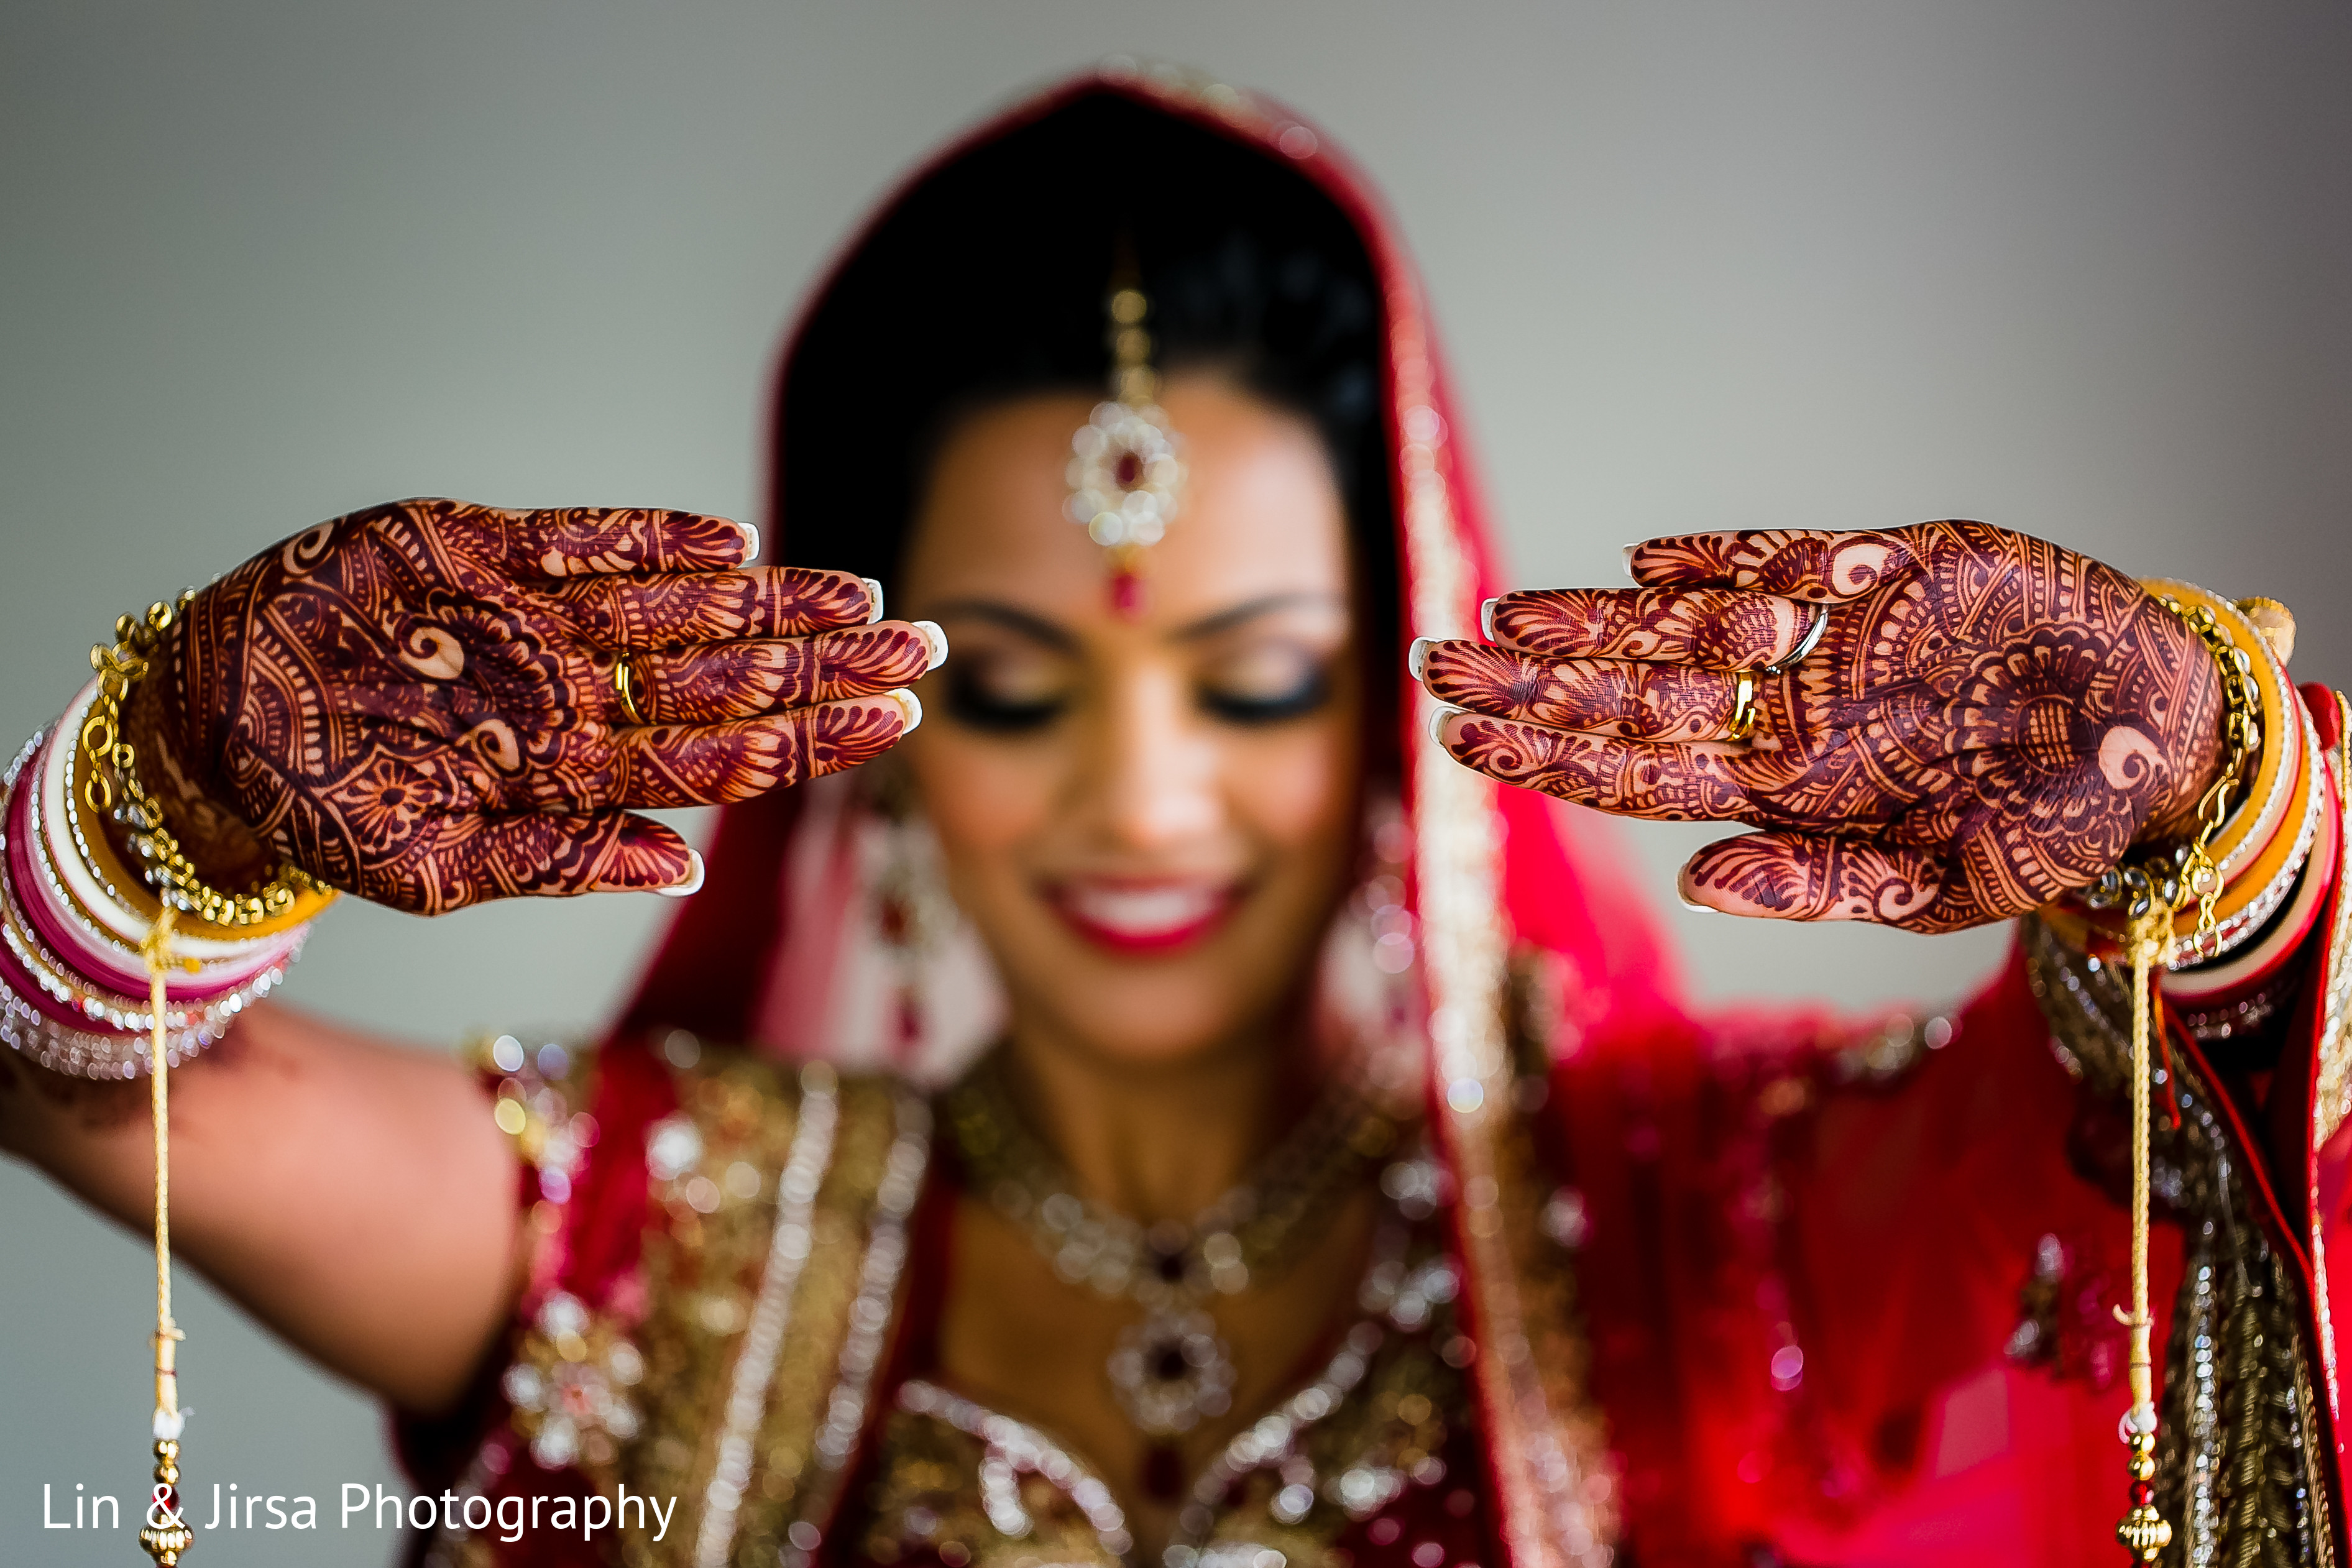 Pose dulhan | Indian bride photography poses, Indian wedding poses, Bride  photography poses